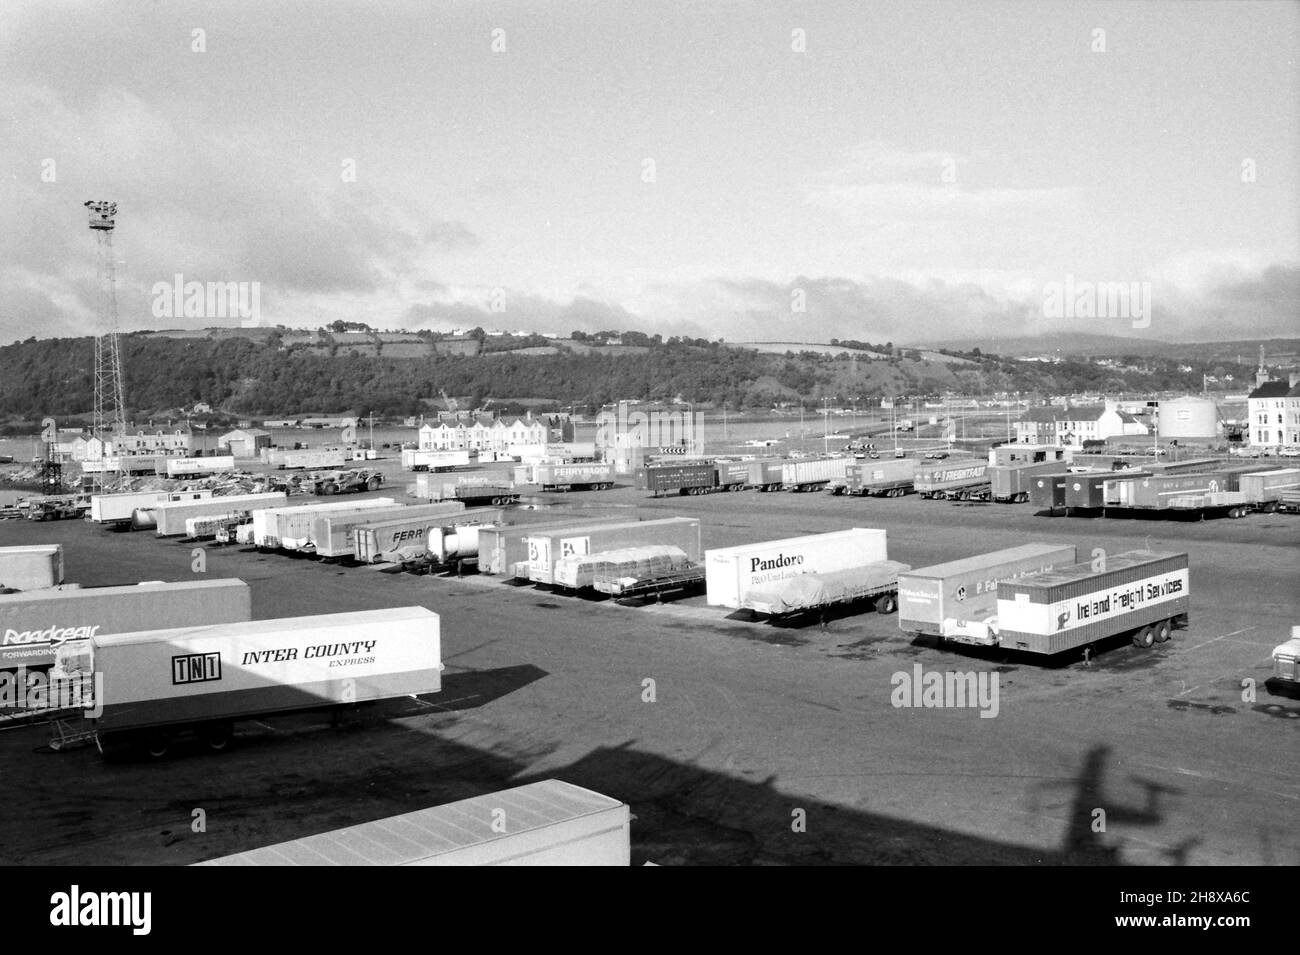 Trailers and containers at the ferry terminal in Larne, Northern Ireland. With houses on Coastguard Road left of centre and buildings at the end of Olderfleet Road on the right.  Taken from P&O Freight Ferry M/V Bison. February 1984 Stock Photo